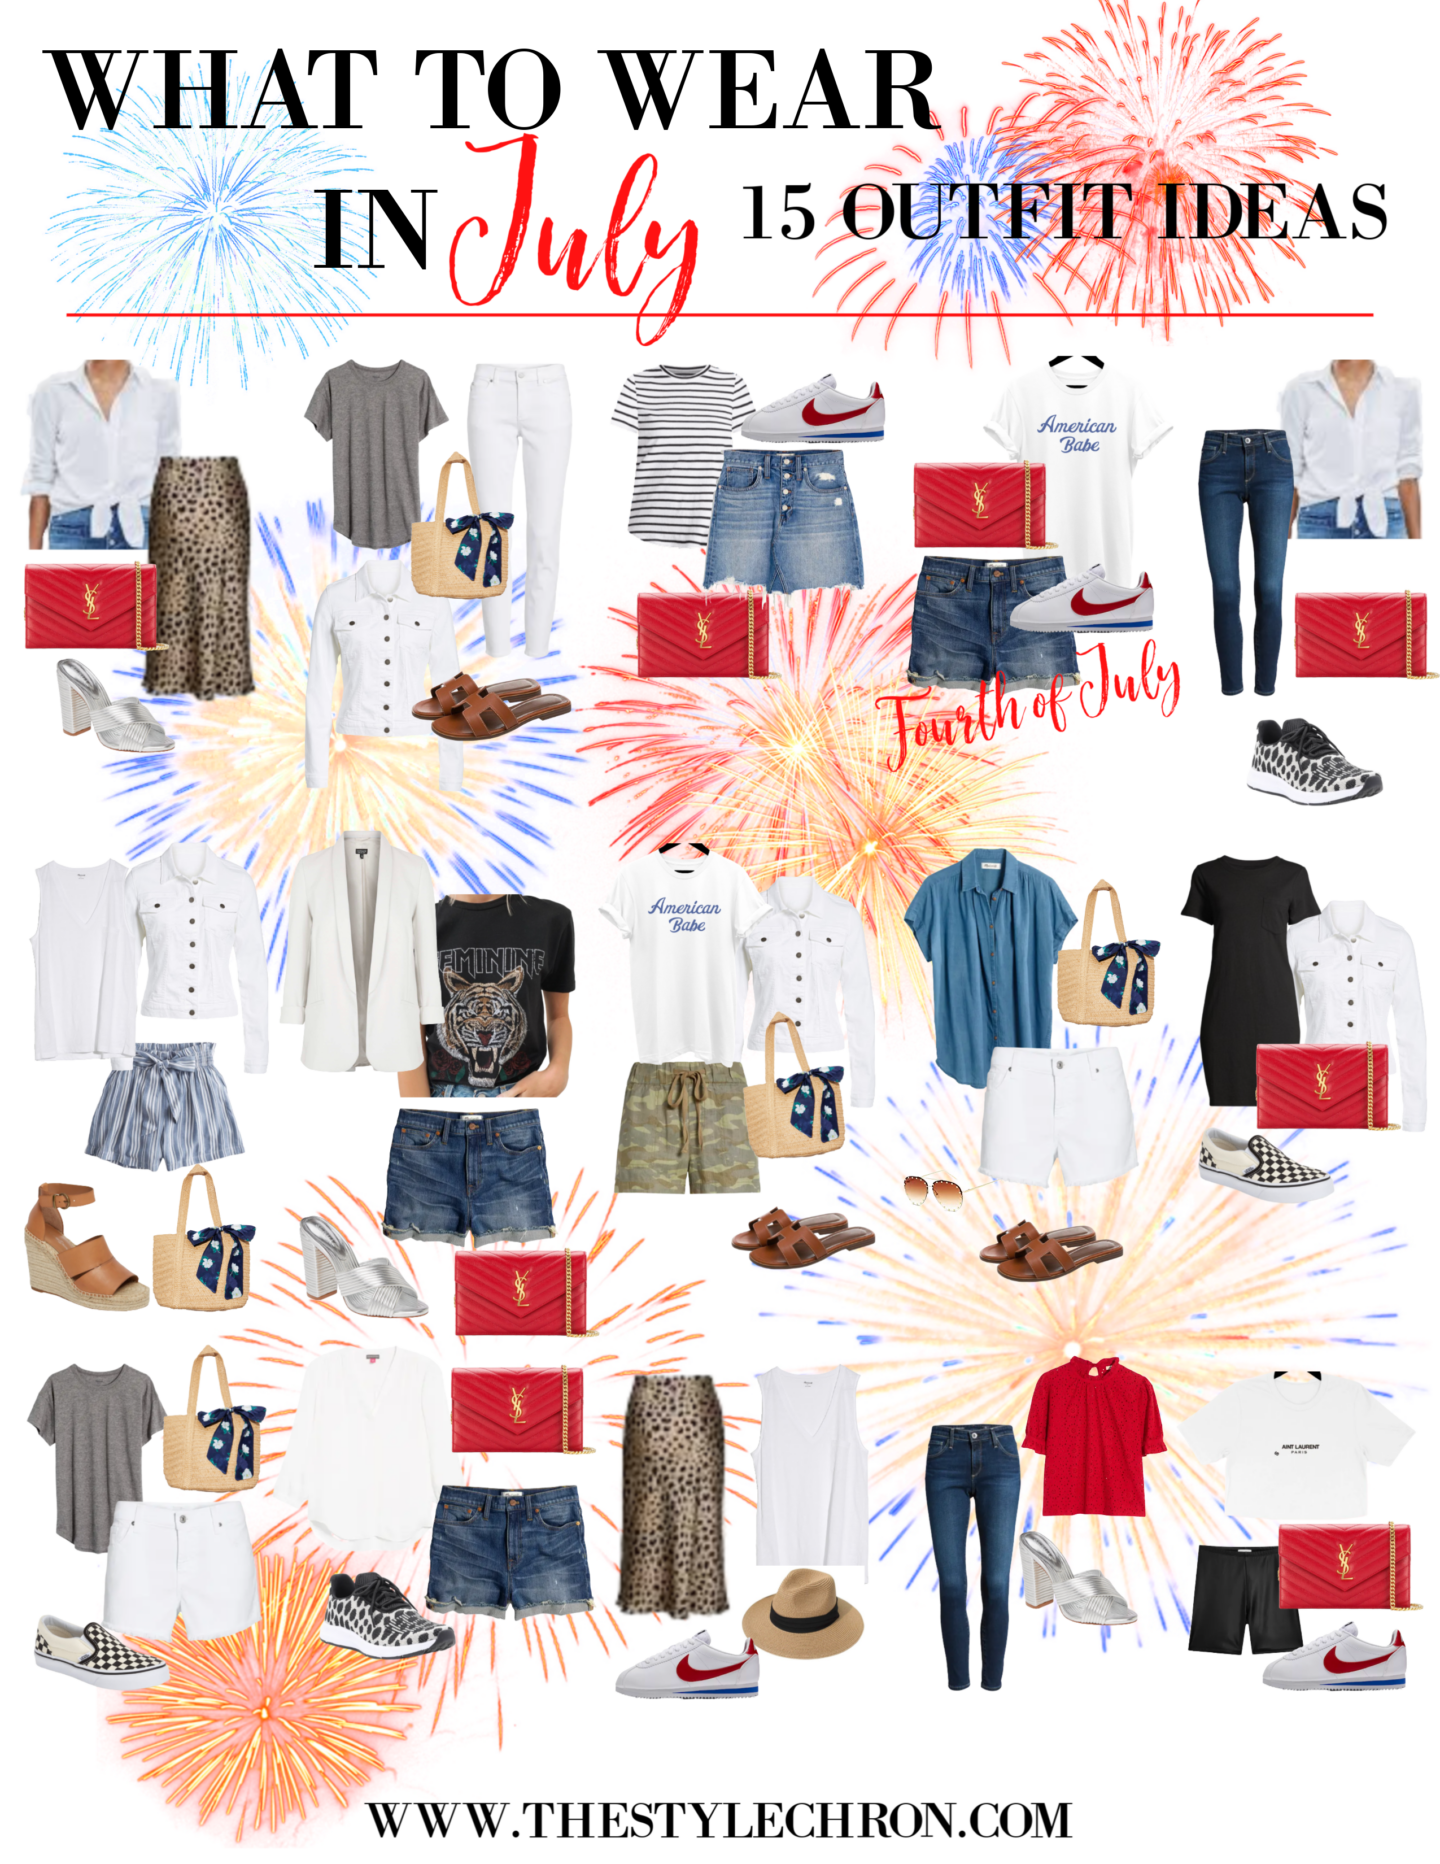 What to Wear in July - 15 Outfit Ideas - Outfit Pairings